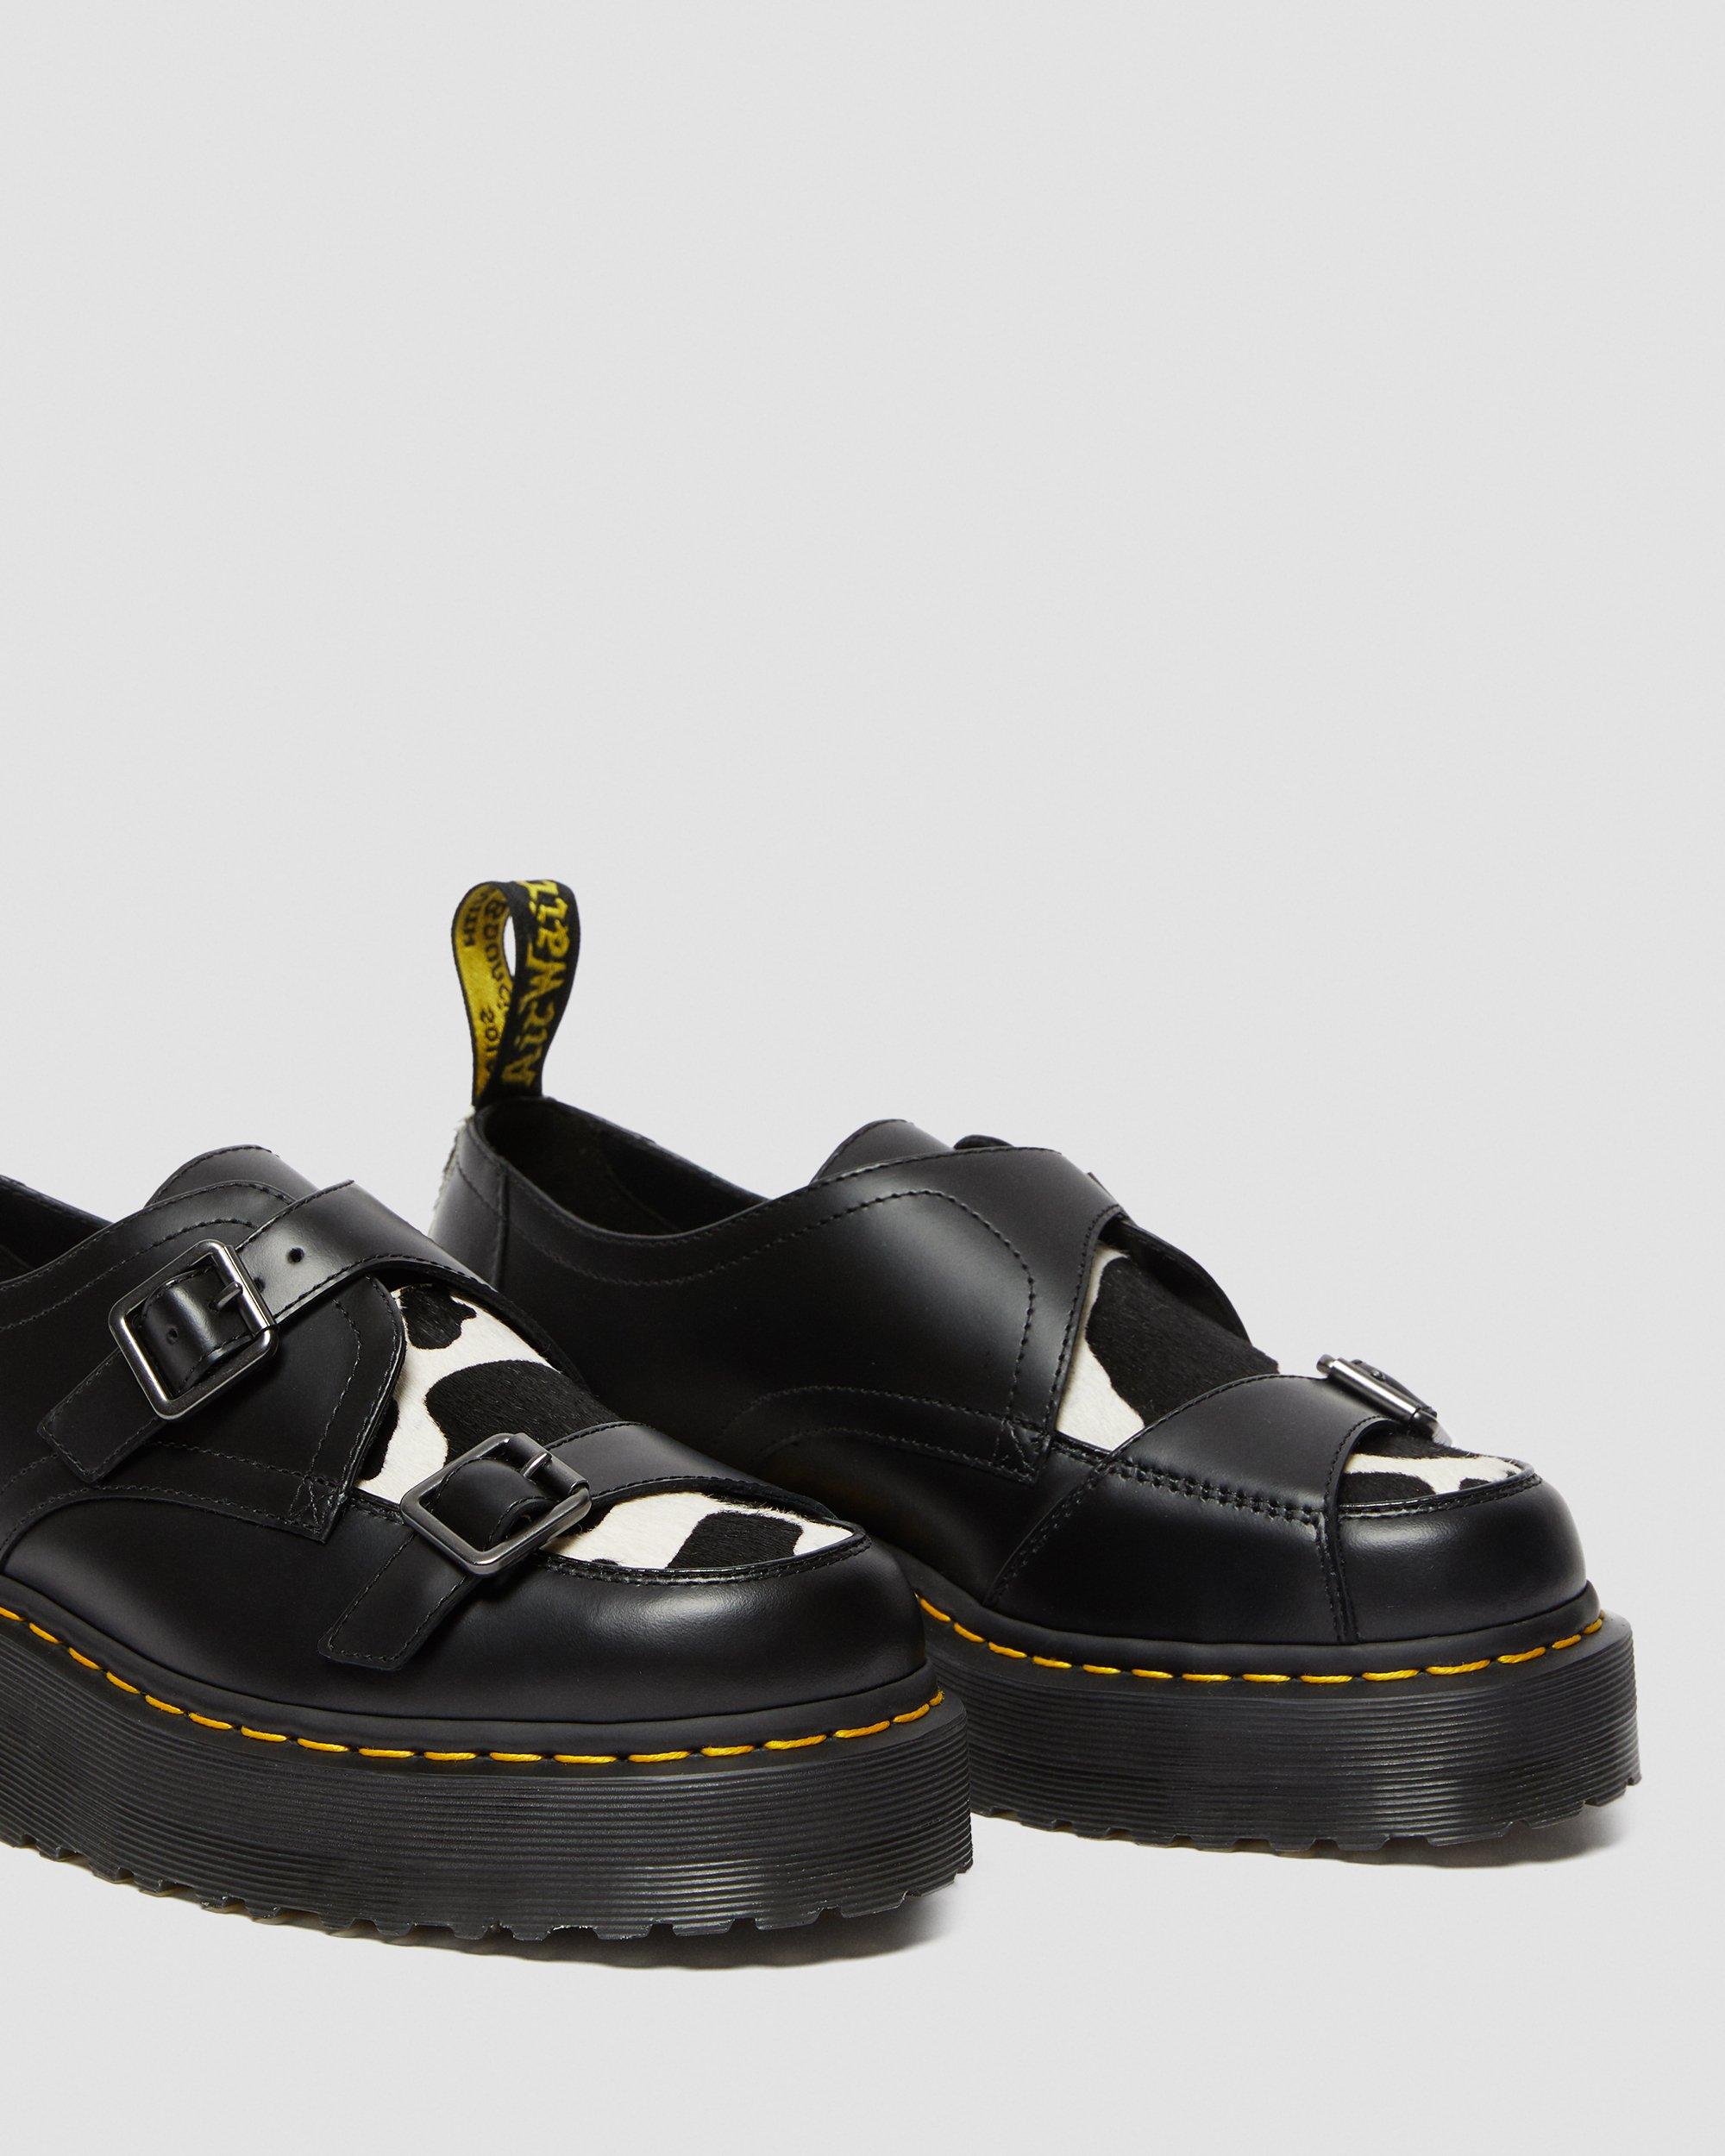 dr martens creepers shoes